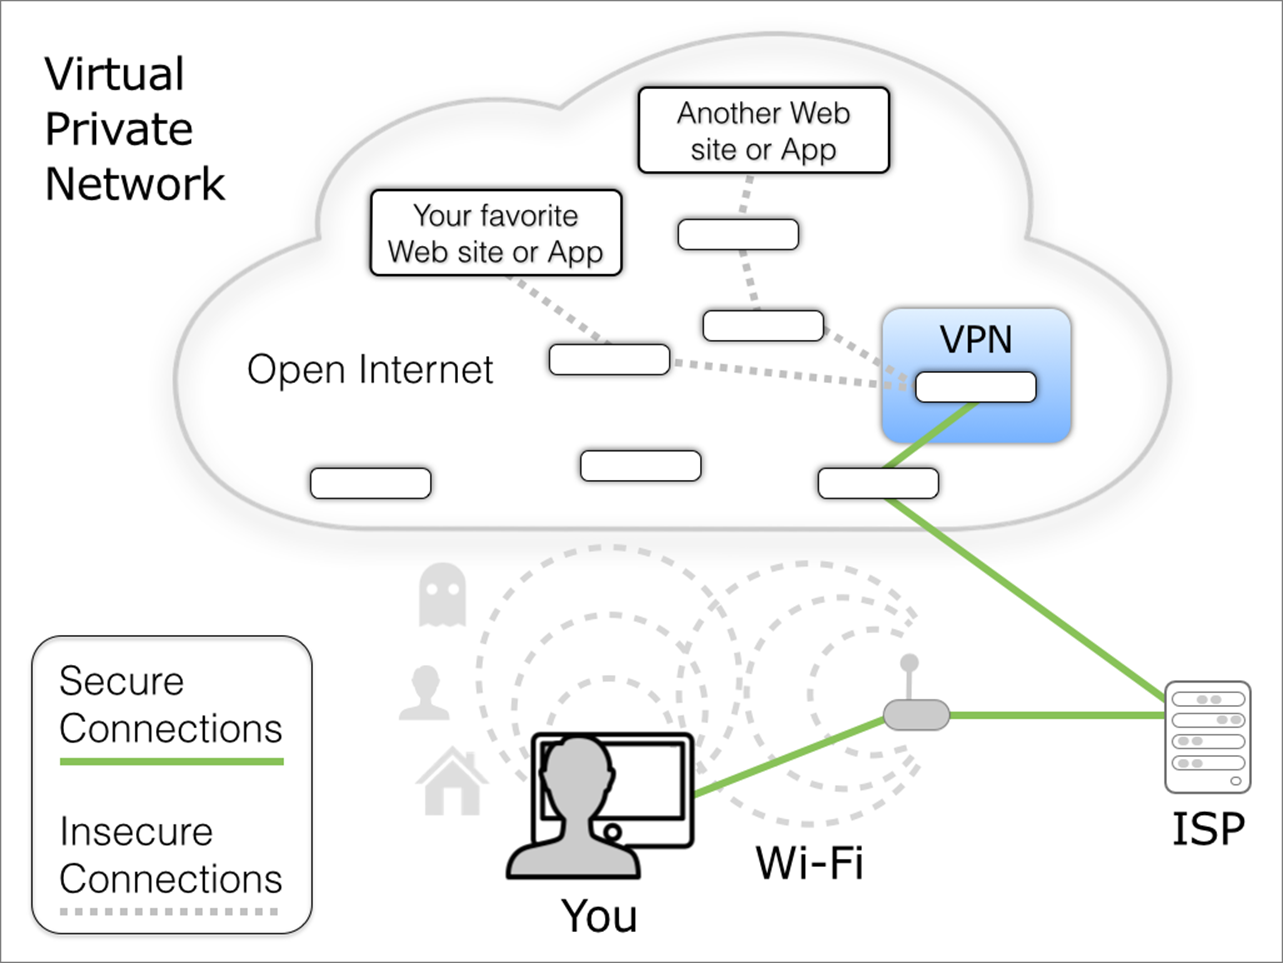 **Figure 4:** Using a VPN encrypts the entire Internet connection between your device and your VPN provider, protecting a greater portion of your data’s path than encrypted Wi-Fi alone.